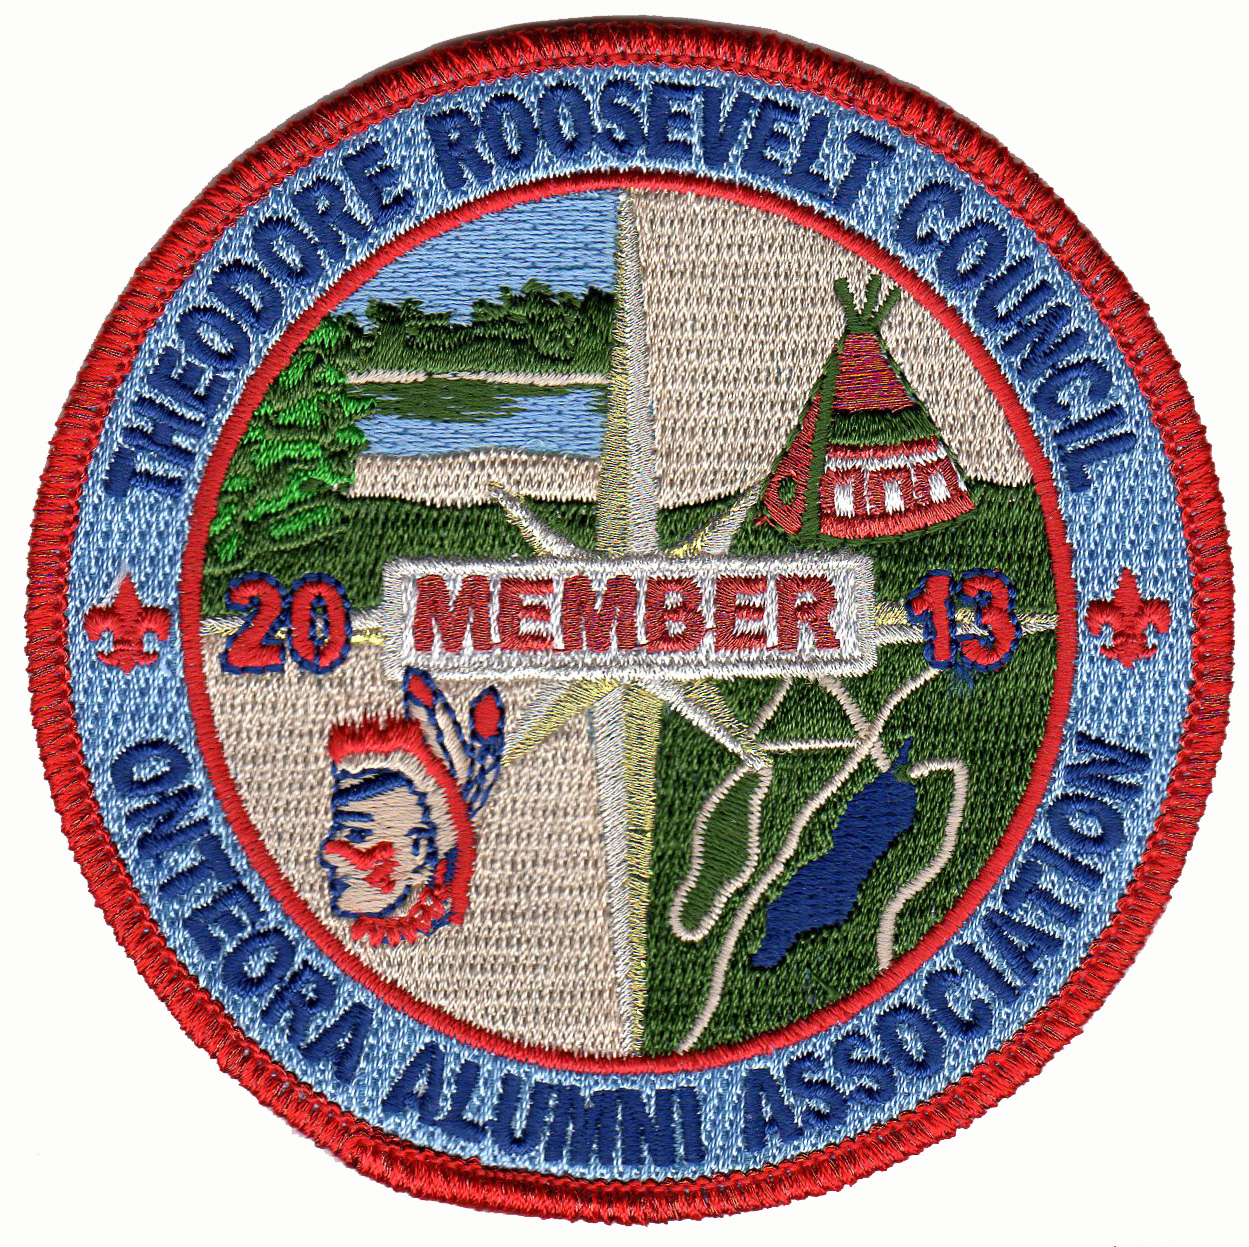 OAA patch - 2013 Member Patch